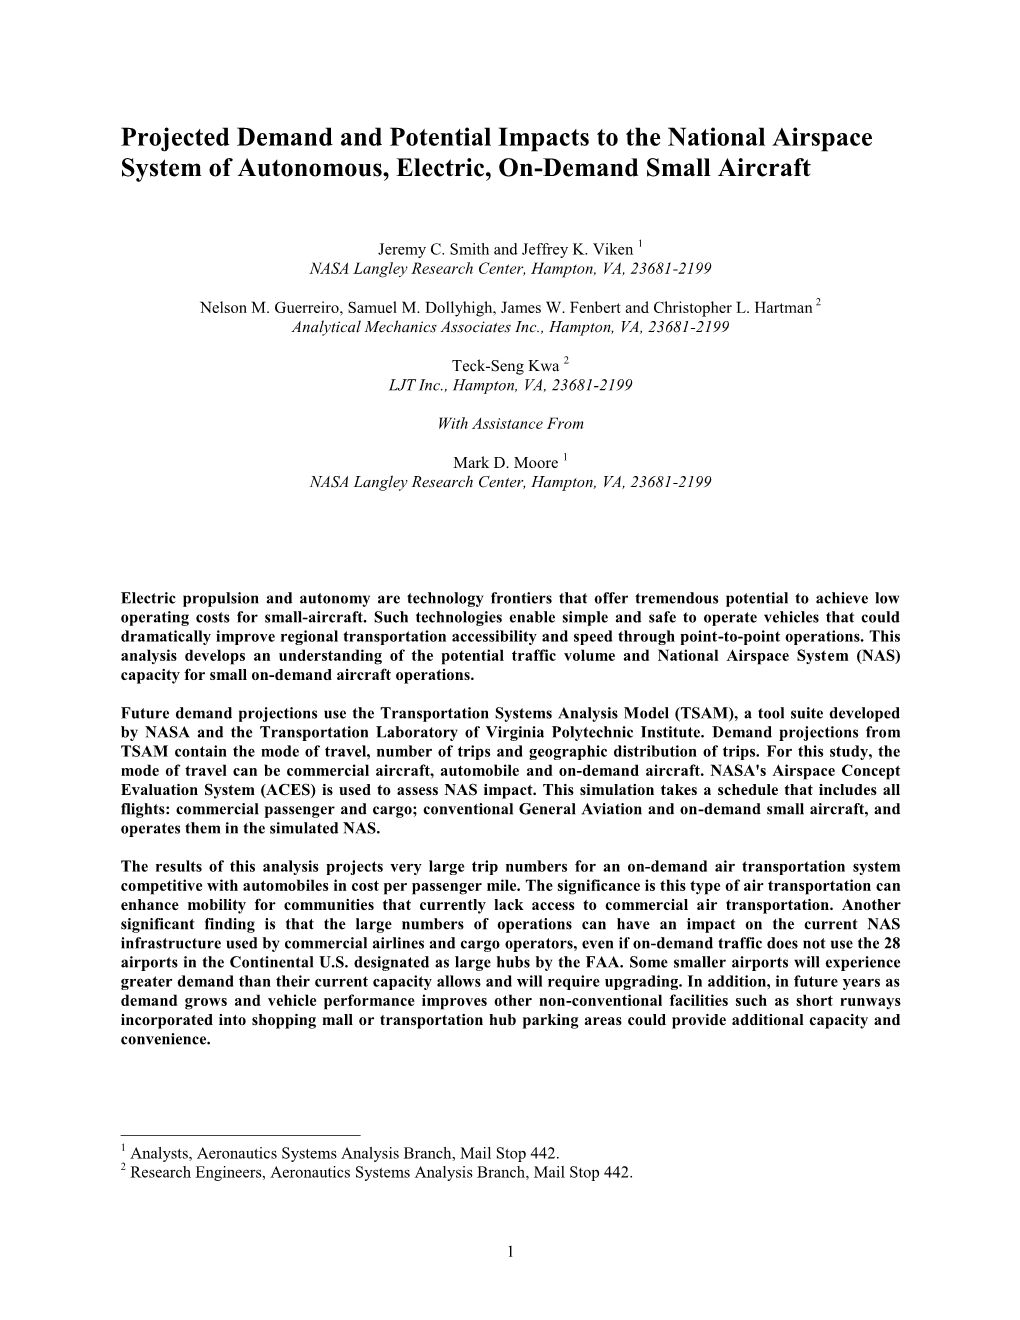 Projected Demand and Potential Impacts to the National Airspace System of Autonomous, Electric, On-Demand Small Aircraft